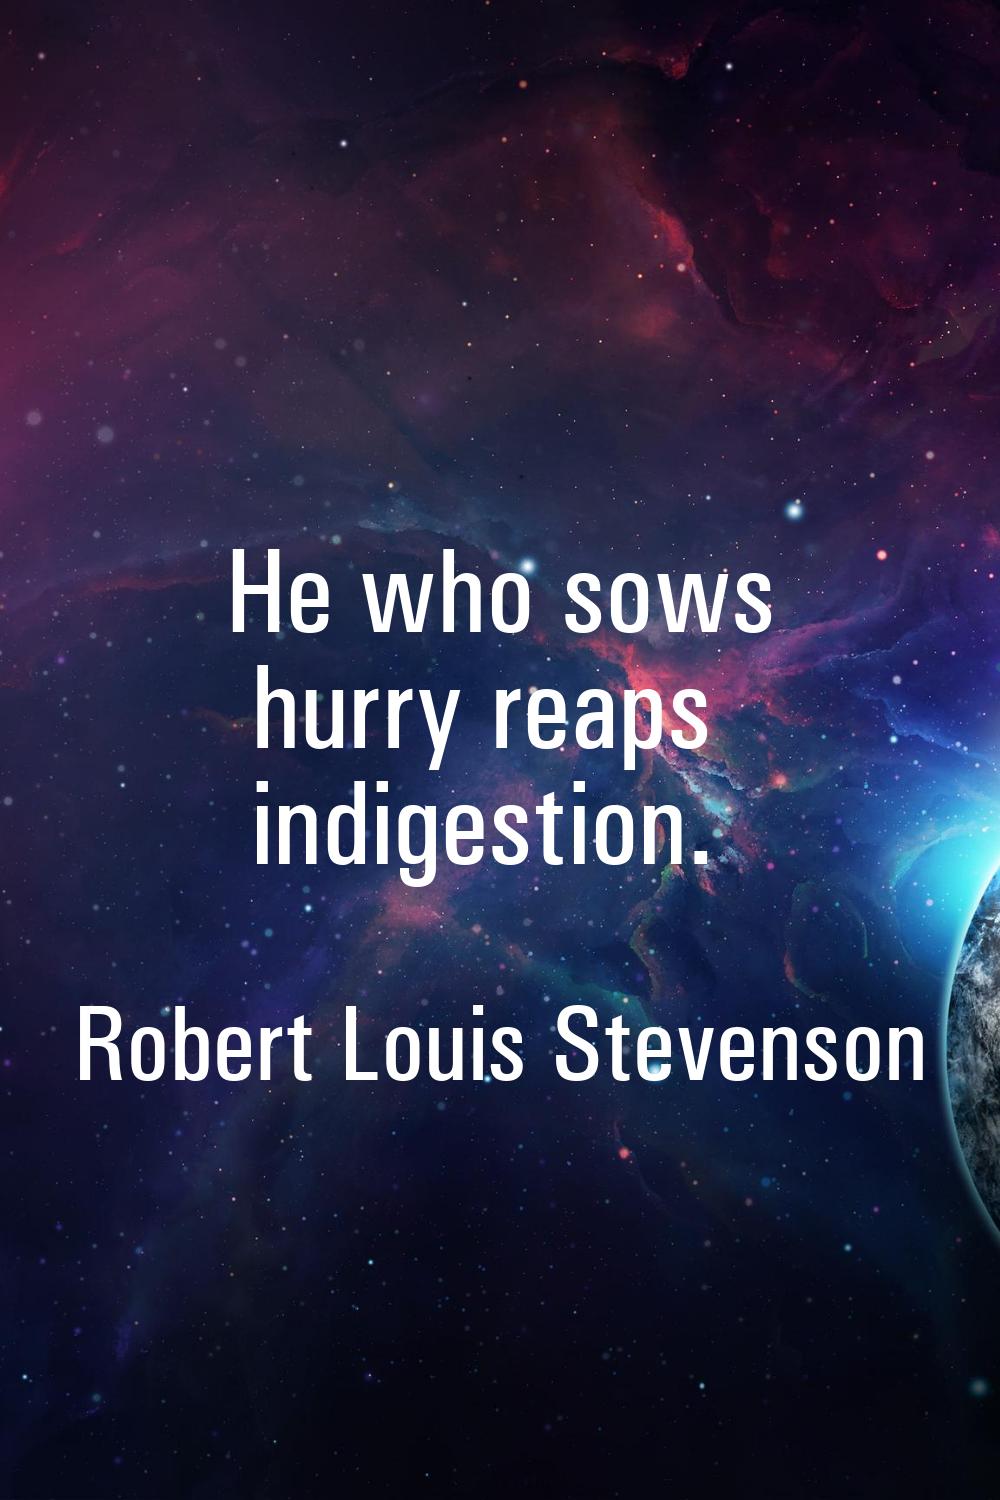 He who sows hurry reaps indigestion.